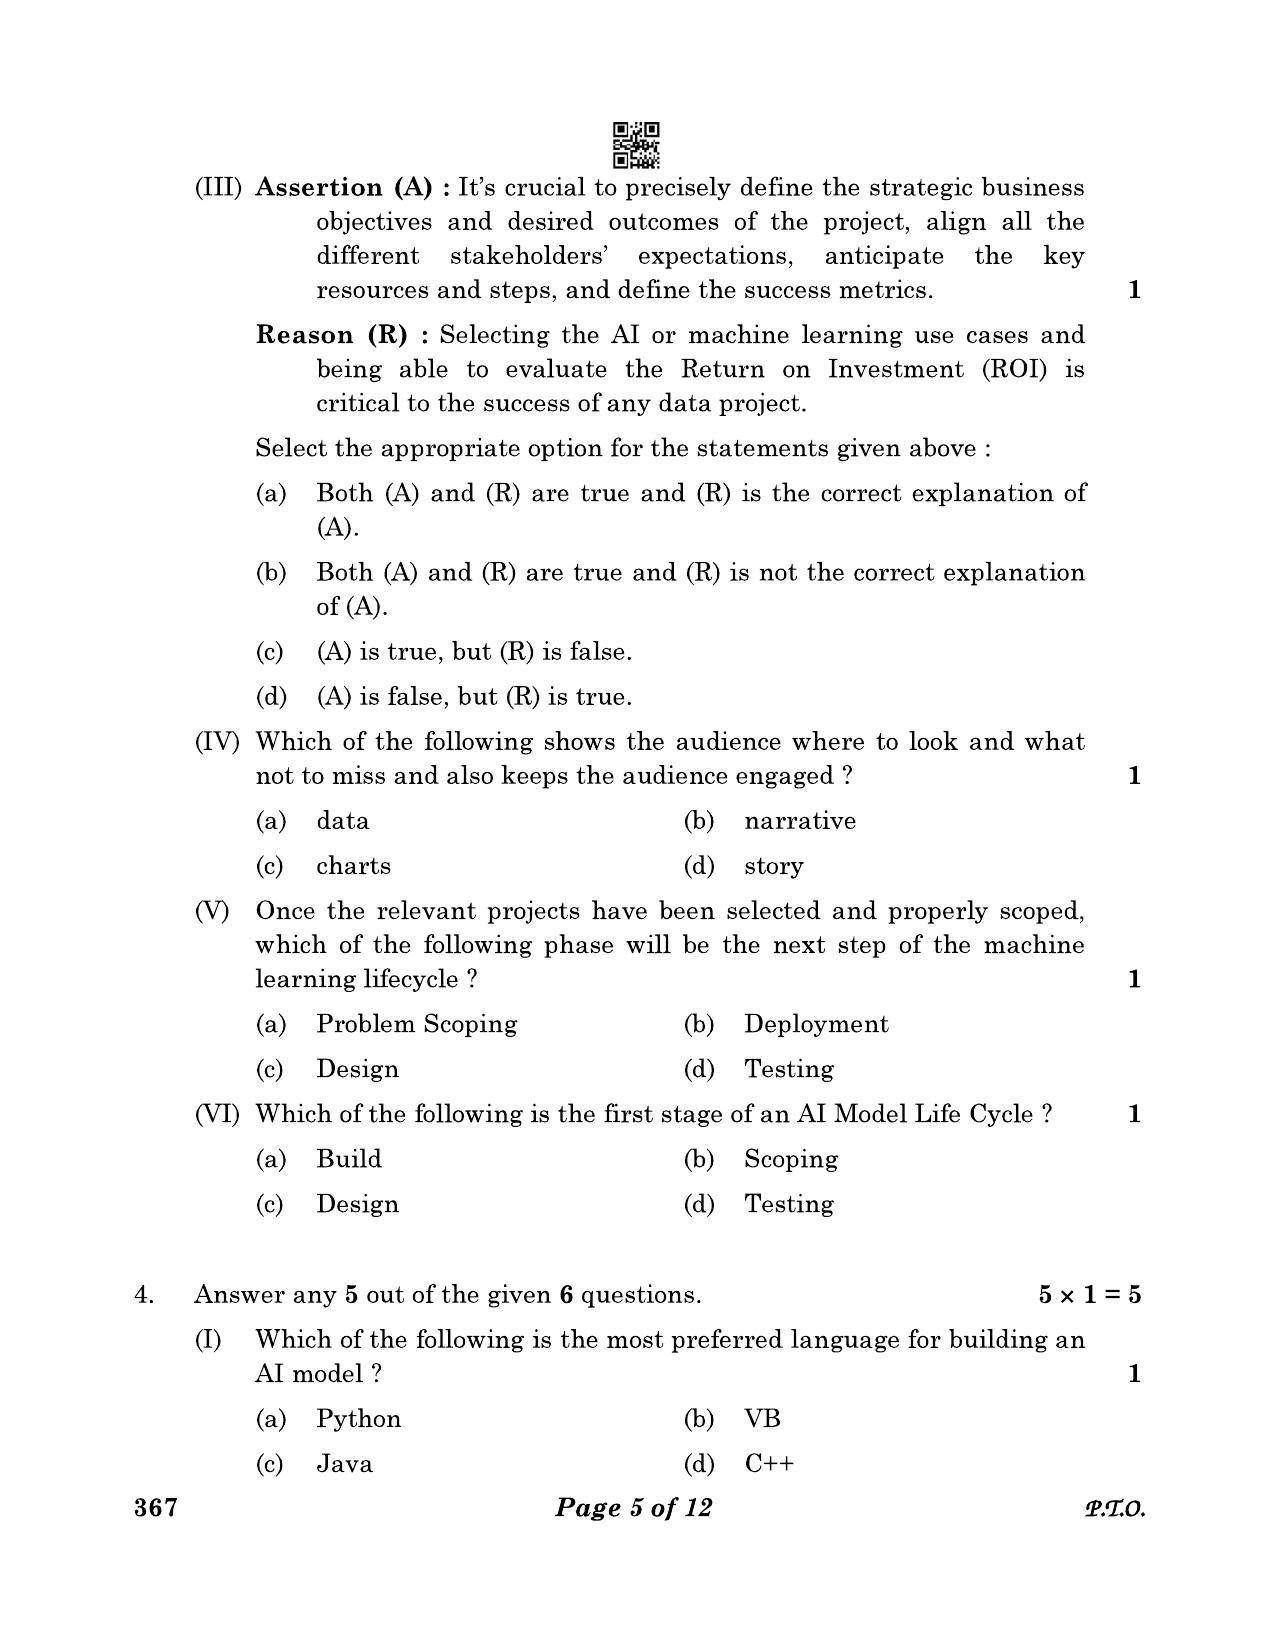 CBSE Class 12 367_Artificial Intelligence 2023 Question Paper - Page 5